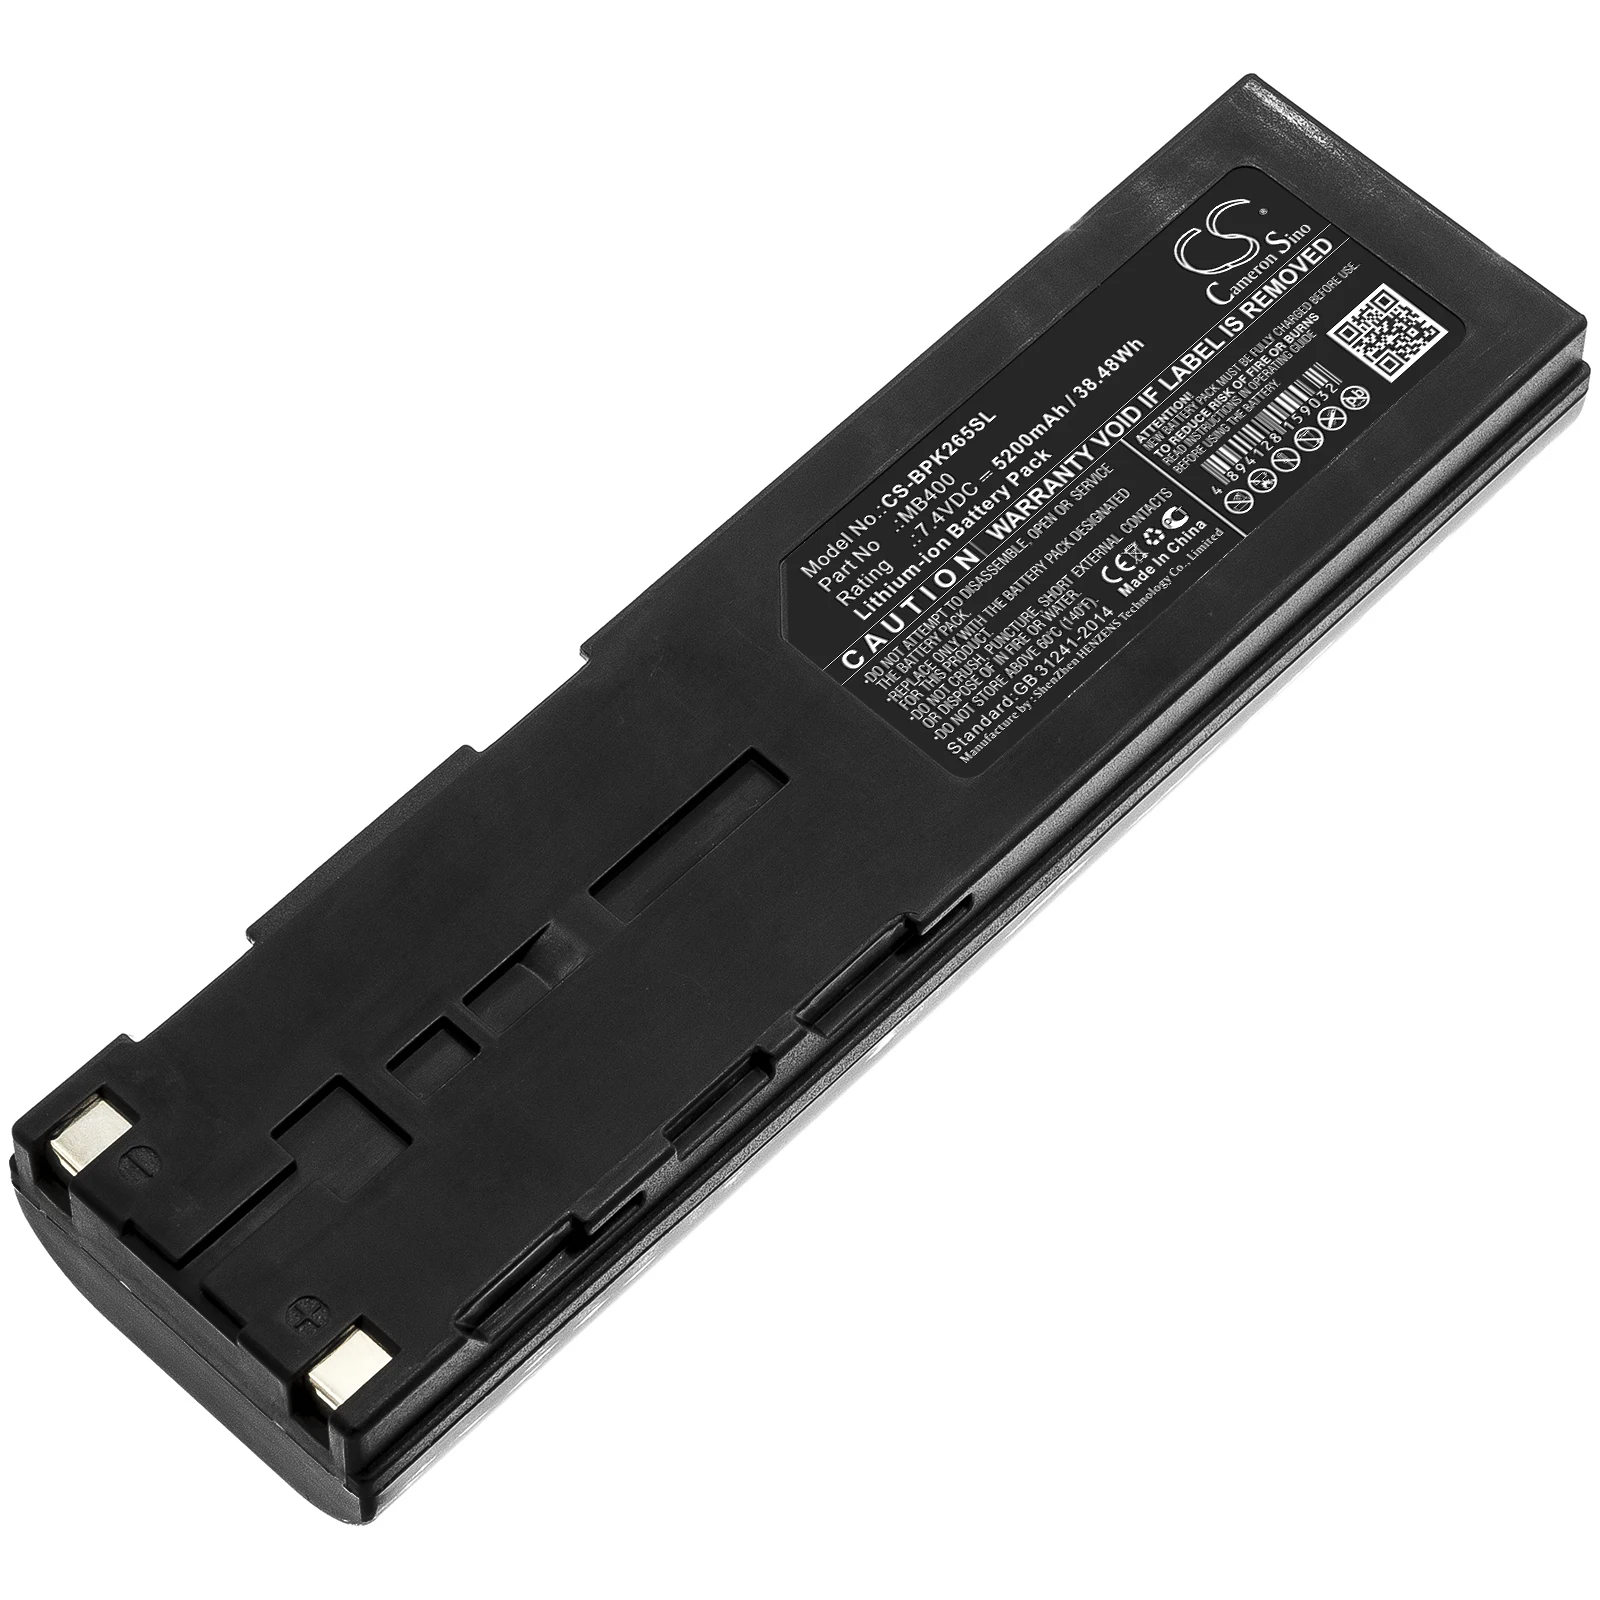 

CS 5200mAh / 38.48Wh battery for BK Precision 2650A, 2652A, 2658A MB400